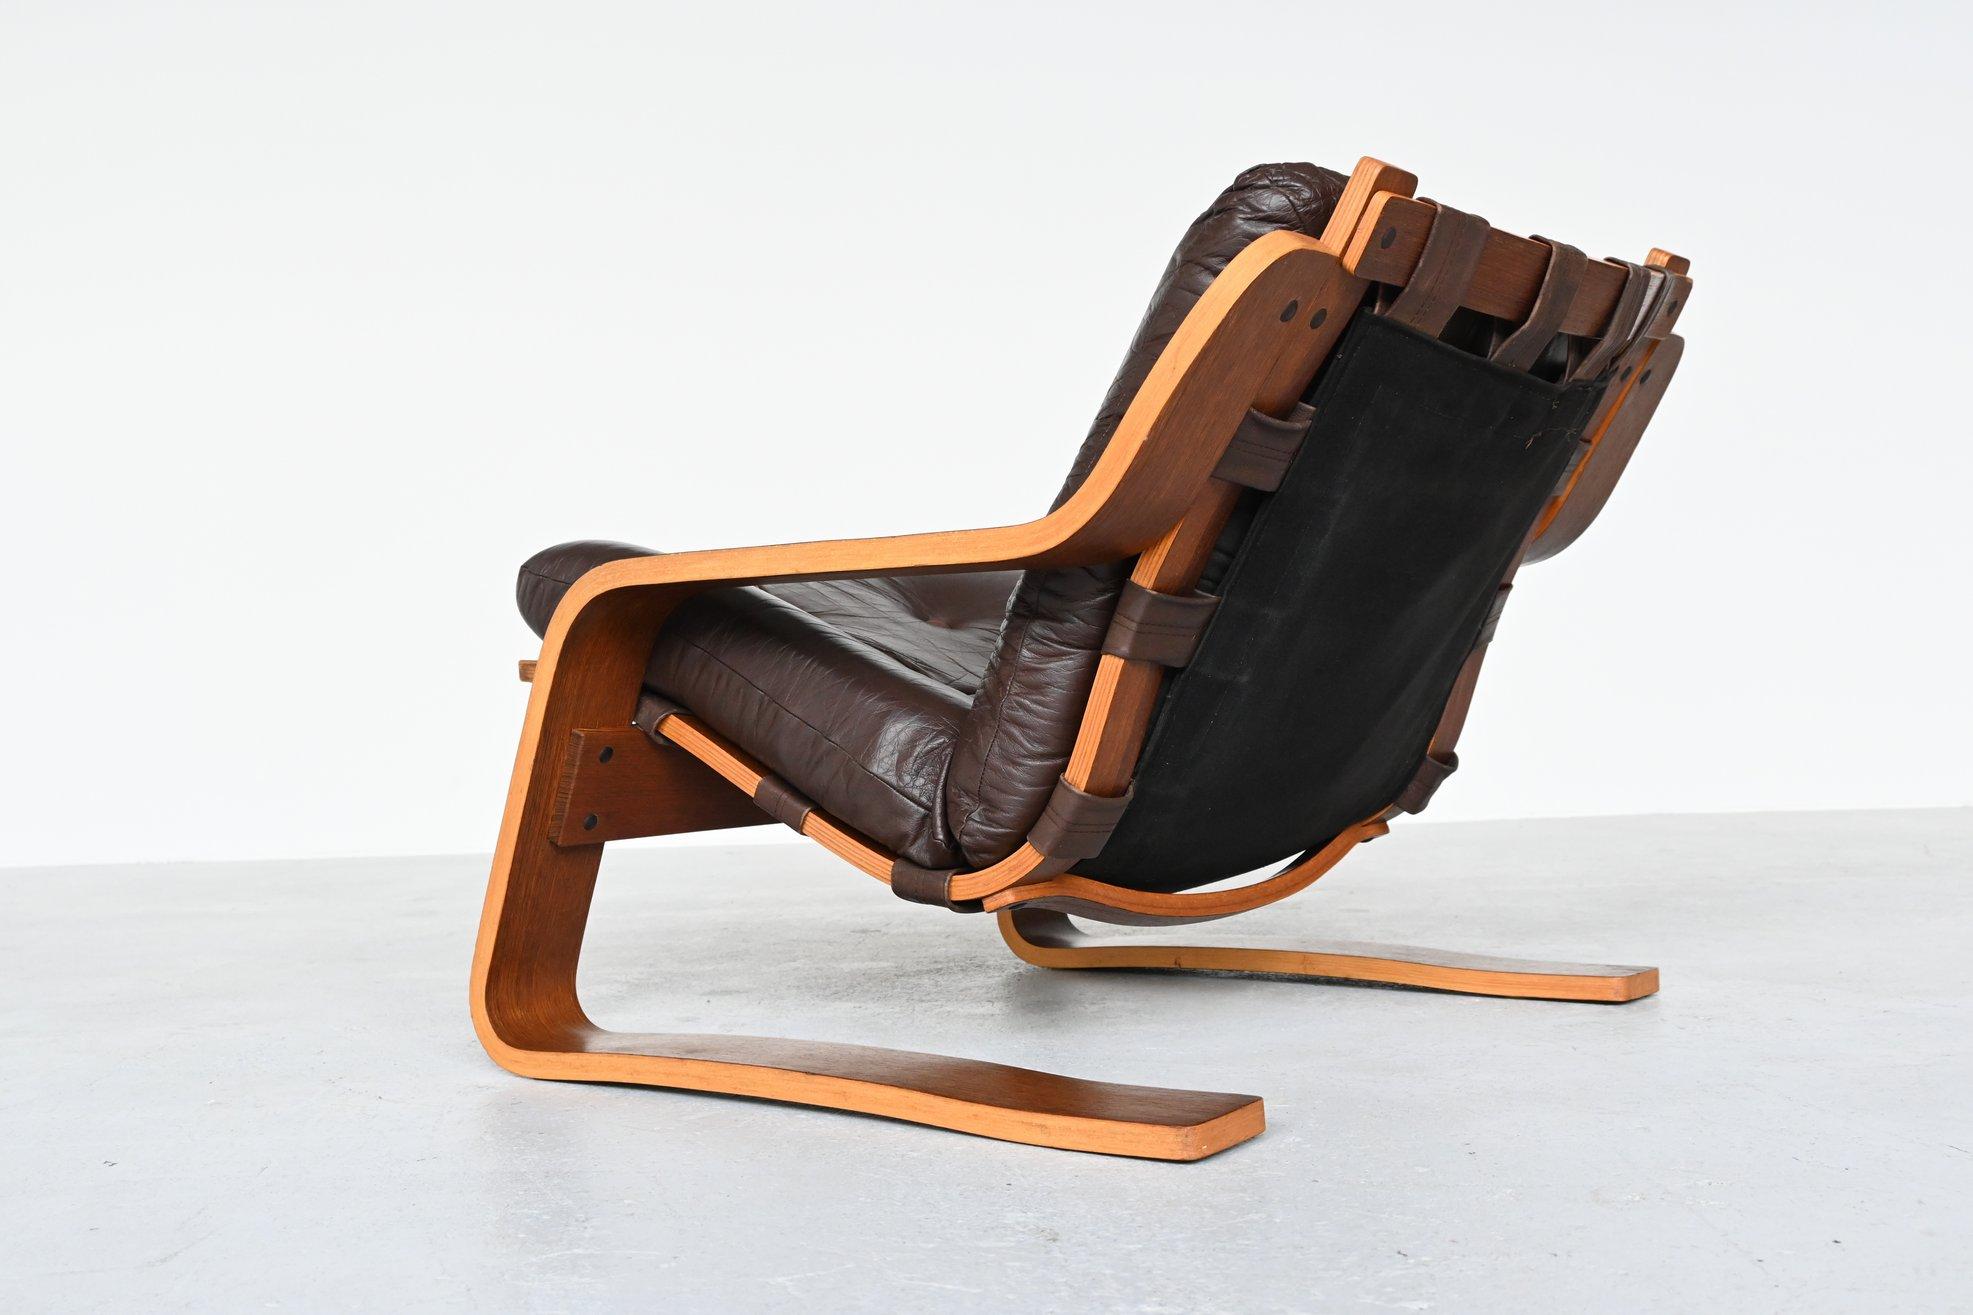 Superb shaped plywood lounge chair, the Netherlands 1970. This fantastic but unknown design is a combination of designs by Ingmar Relling from Norway because of the wood, leather and canvas and Alvar Aalto from the Netherlands who often used bent